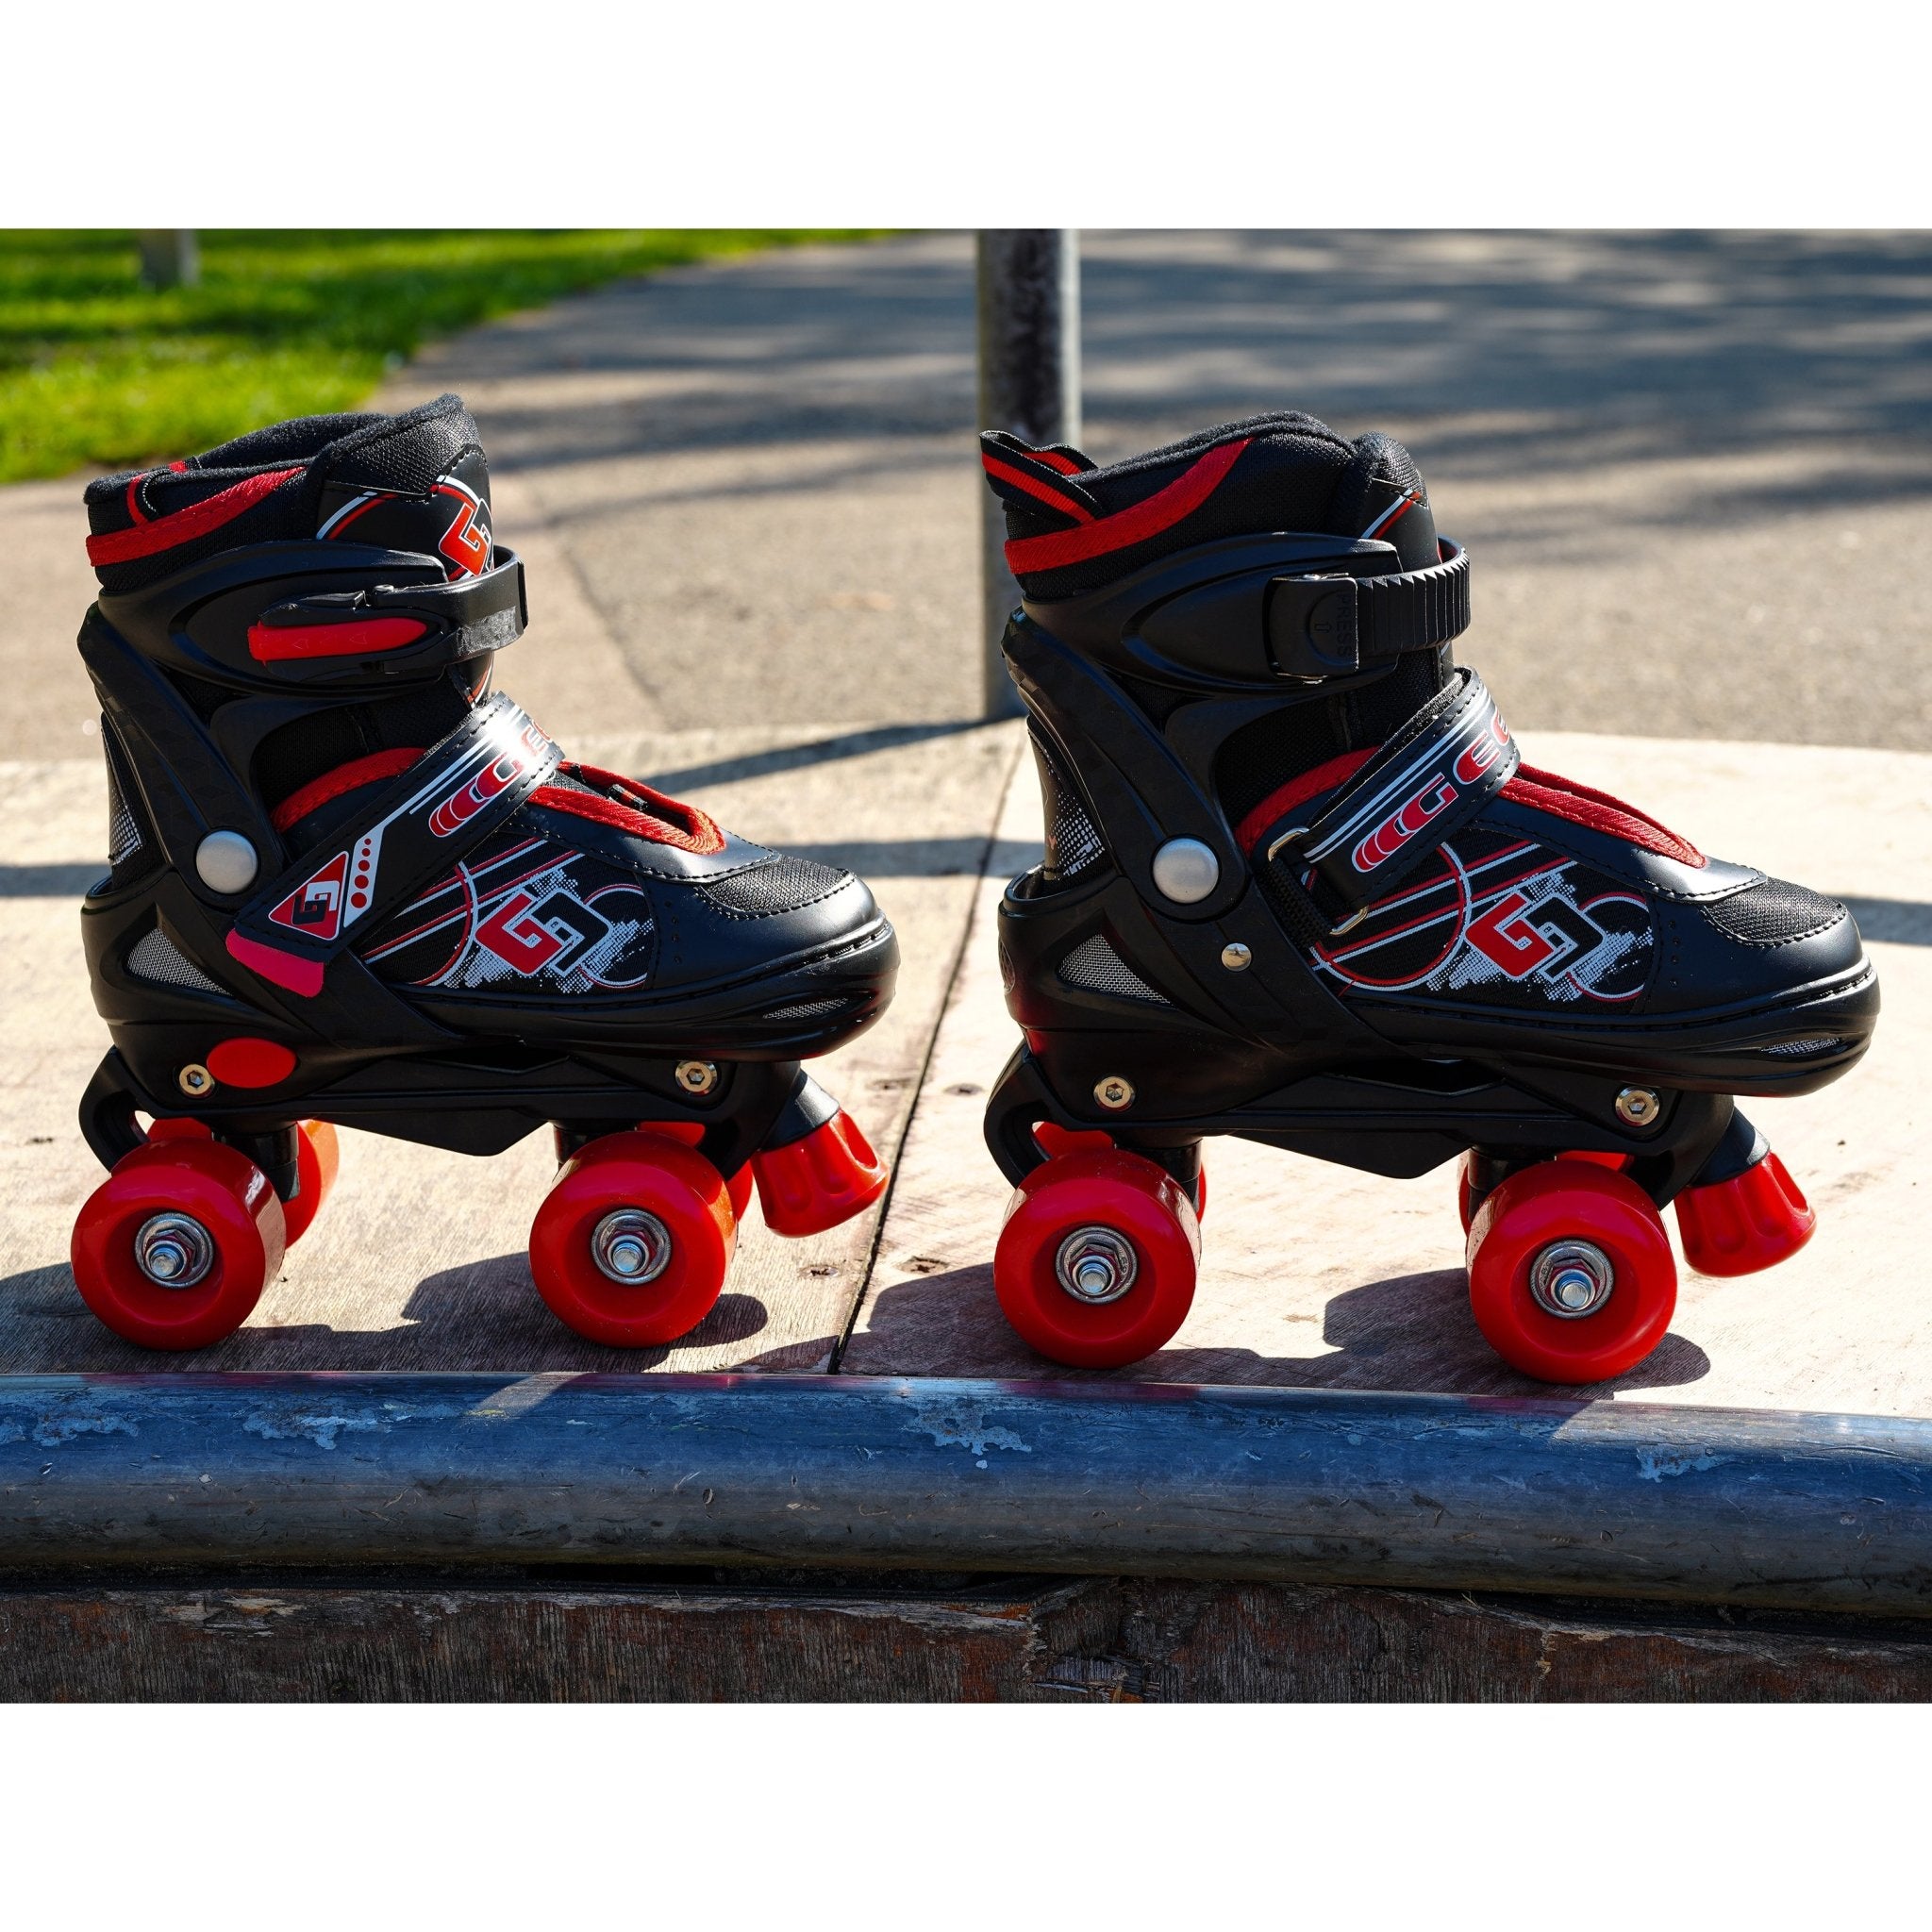 Red and Black Roller Skates for Kids with 4 Wheel The Magic Toy Shop - The Magic Toy Shop